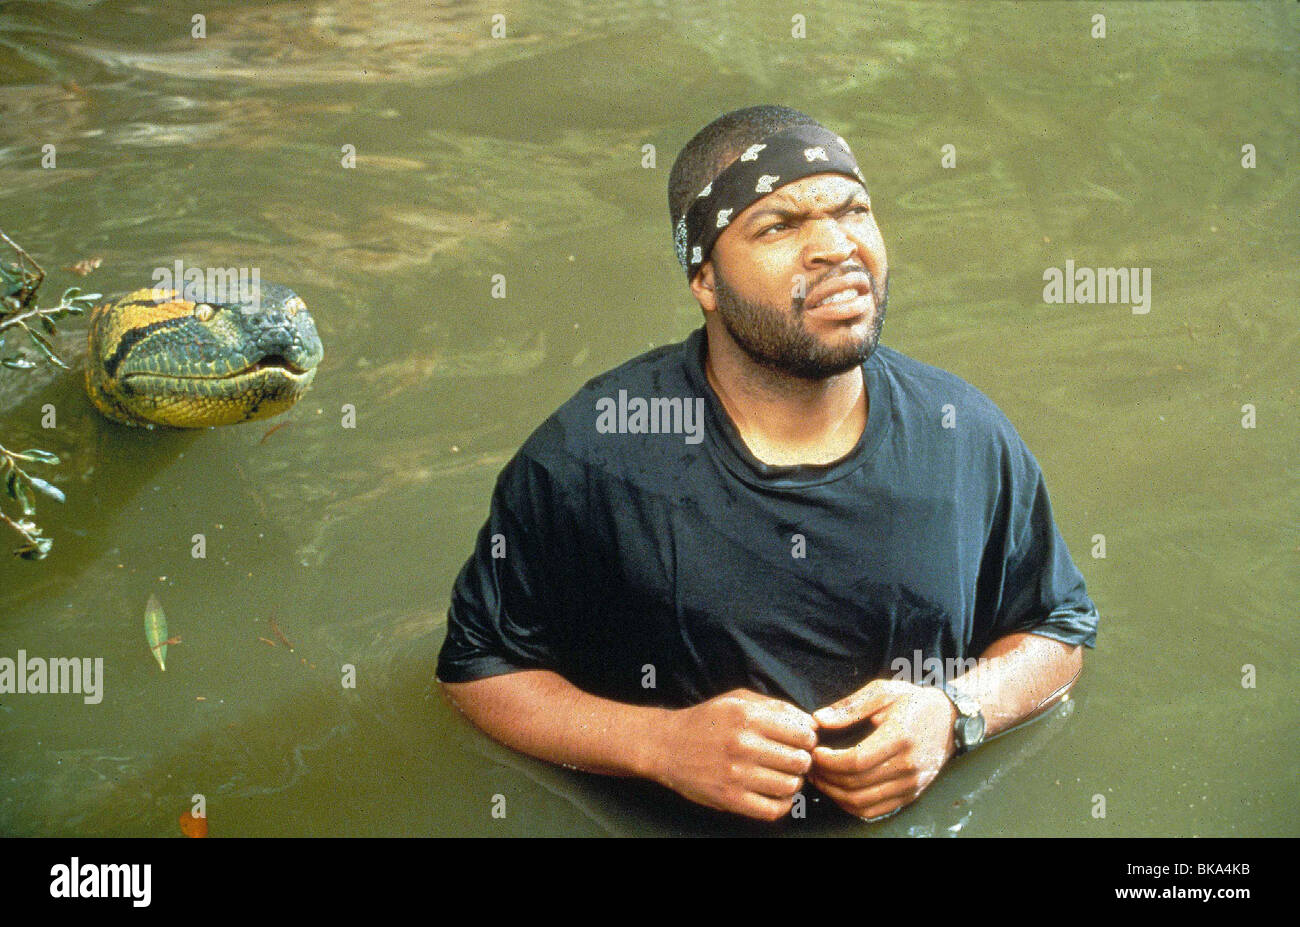 Ice Cube Bandana High Resolution Stock Photography and Images - Alamy